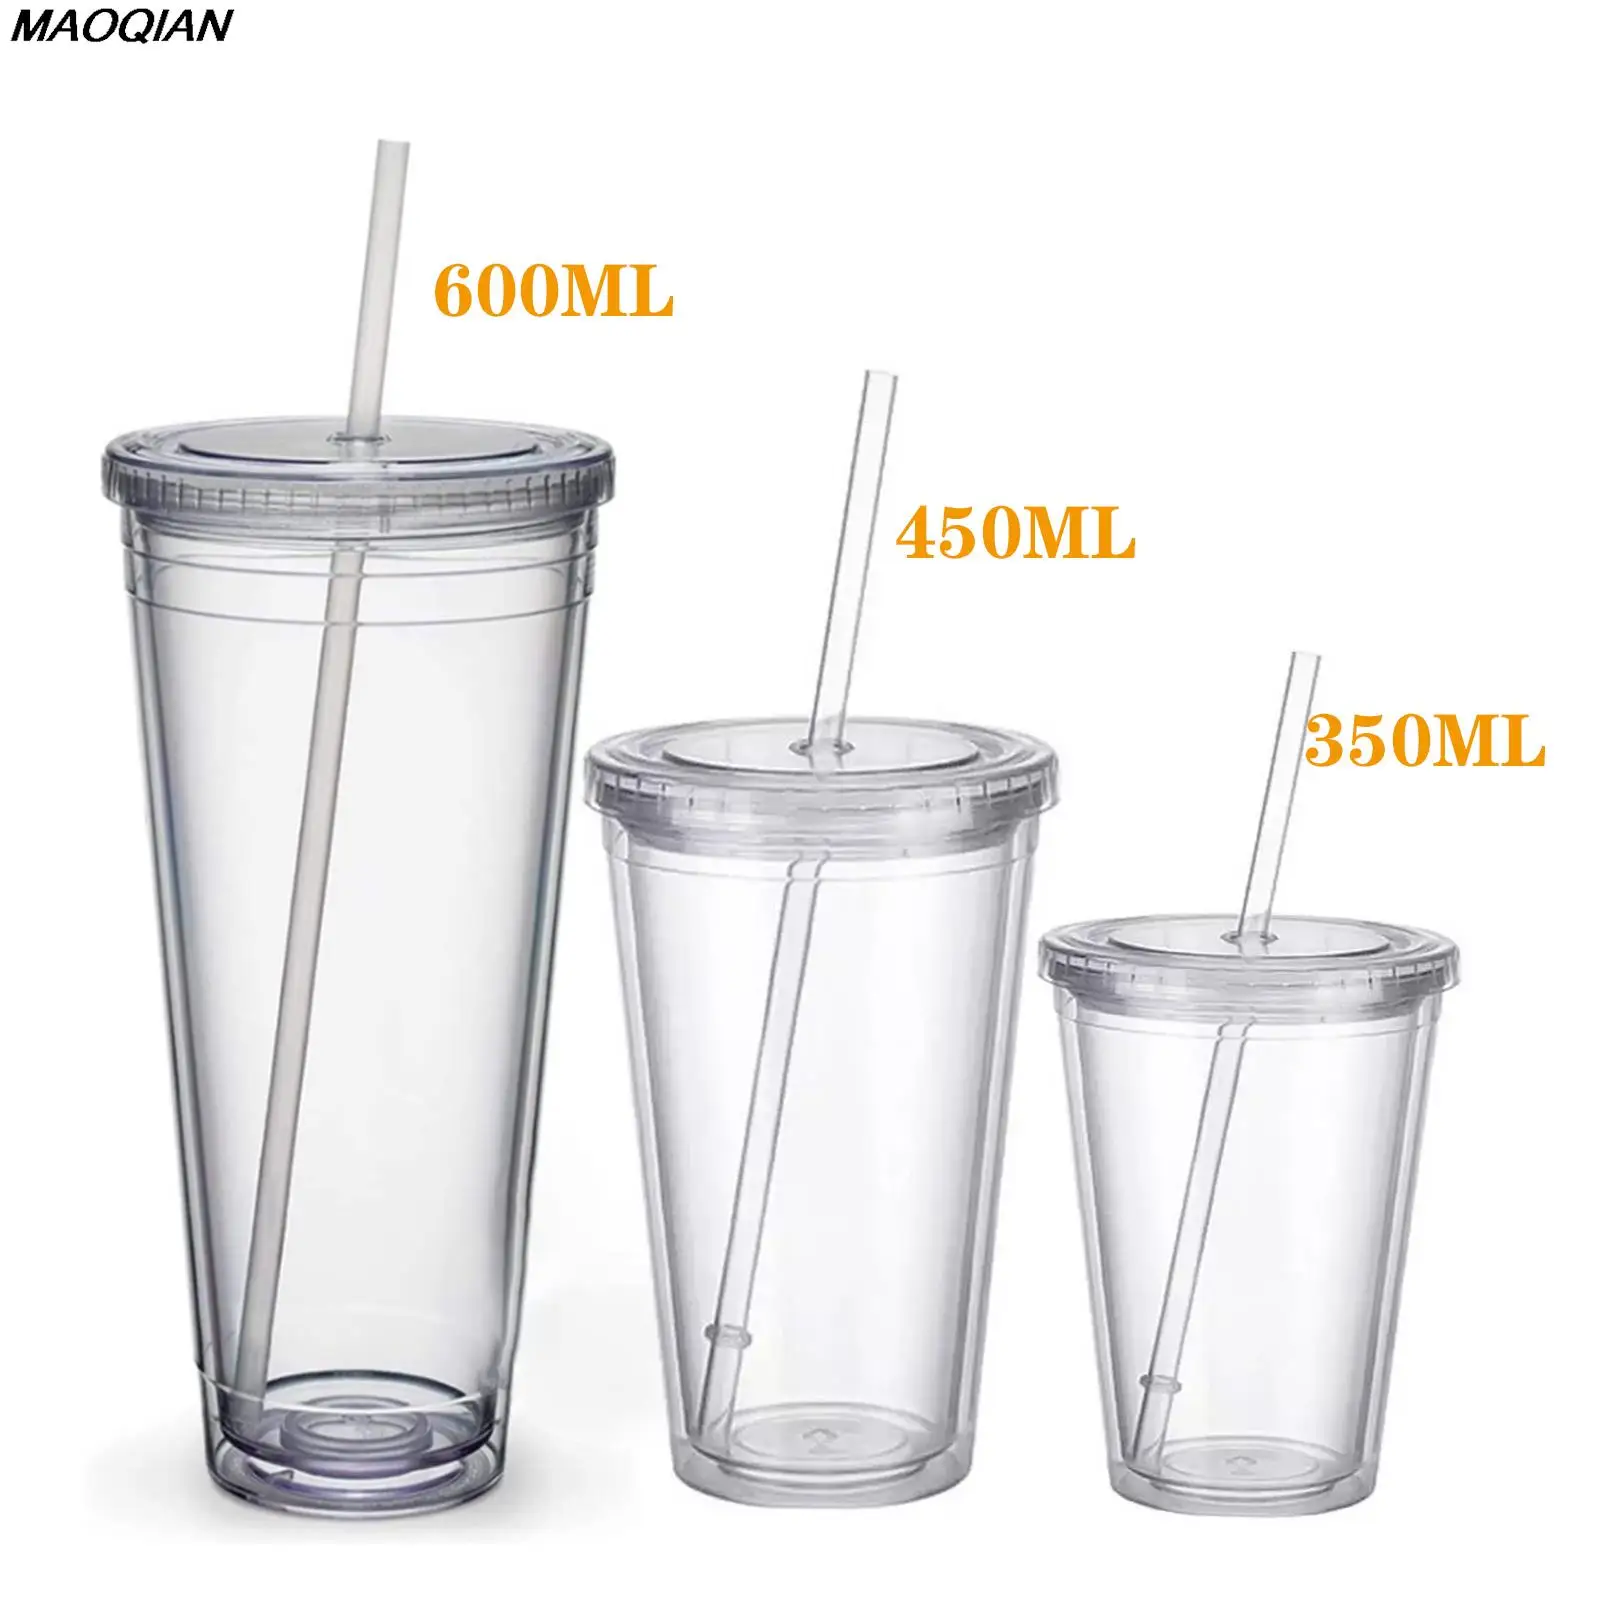 https://ae01.alicdn.com/kf/S6859edb110354ed28703a51b57565f21k/650ml-500ML-Clear-Tumbler-With-Straw-Reusable-Transparent-Double-layer-Water-Bottle-For-Coffee-Milk-DIY.jpg